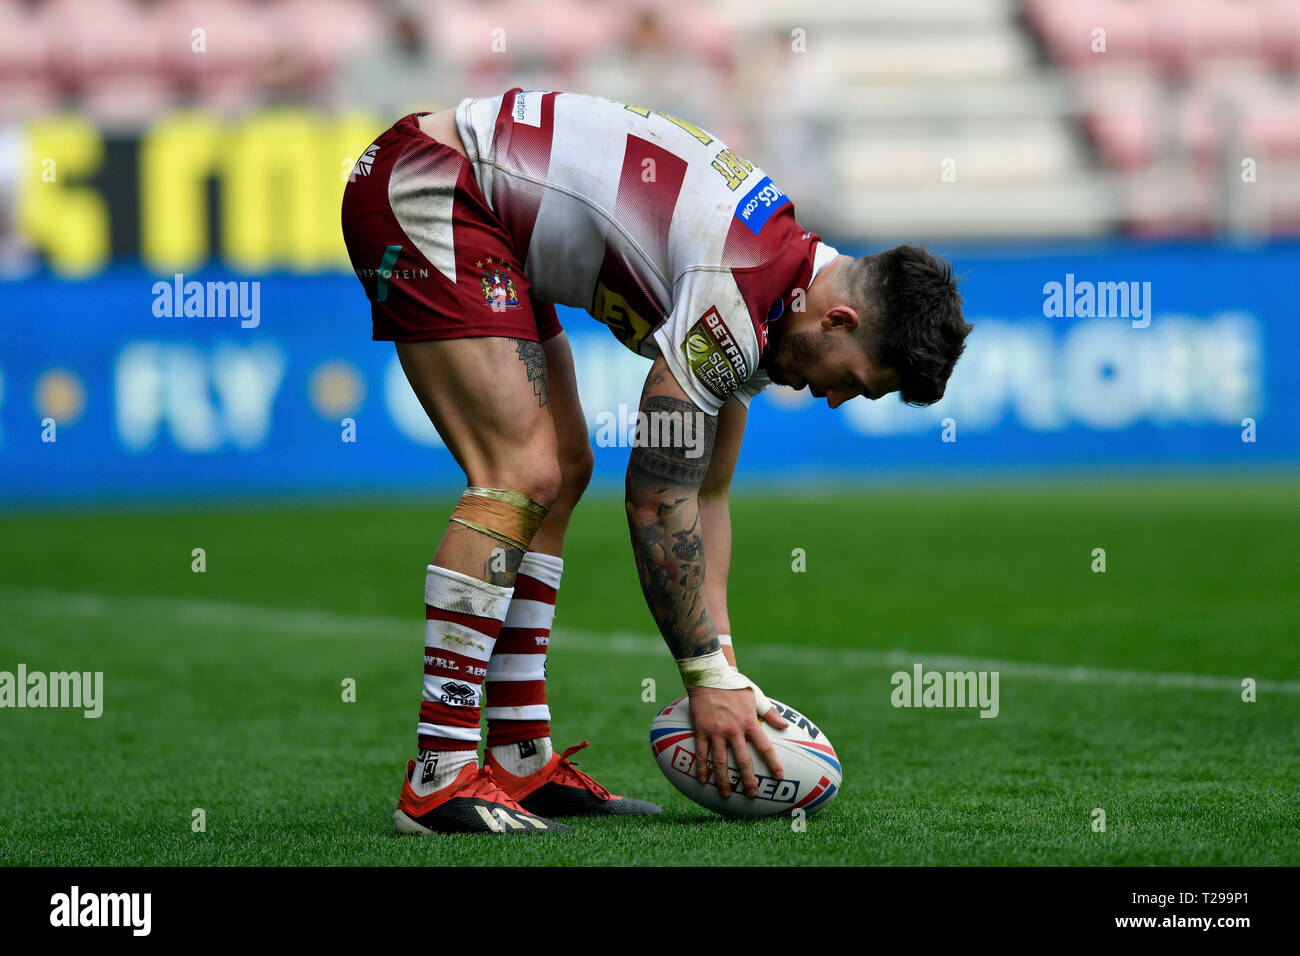 Oliver Gildart High Resolution Stock Photography And Images Alamy